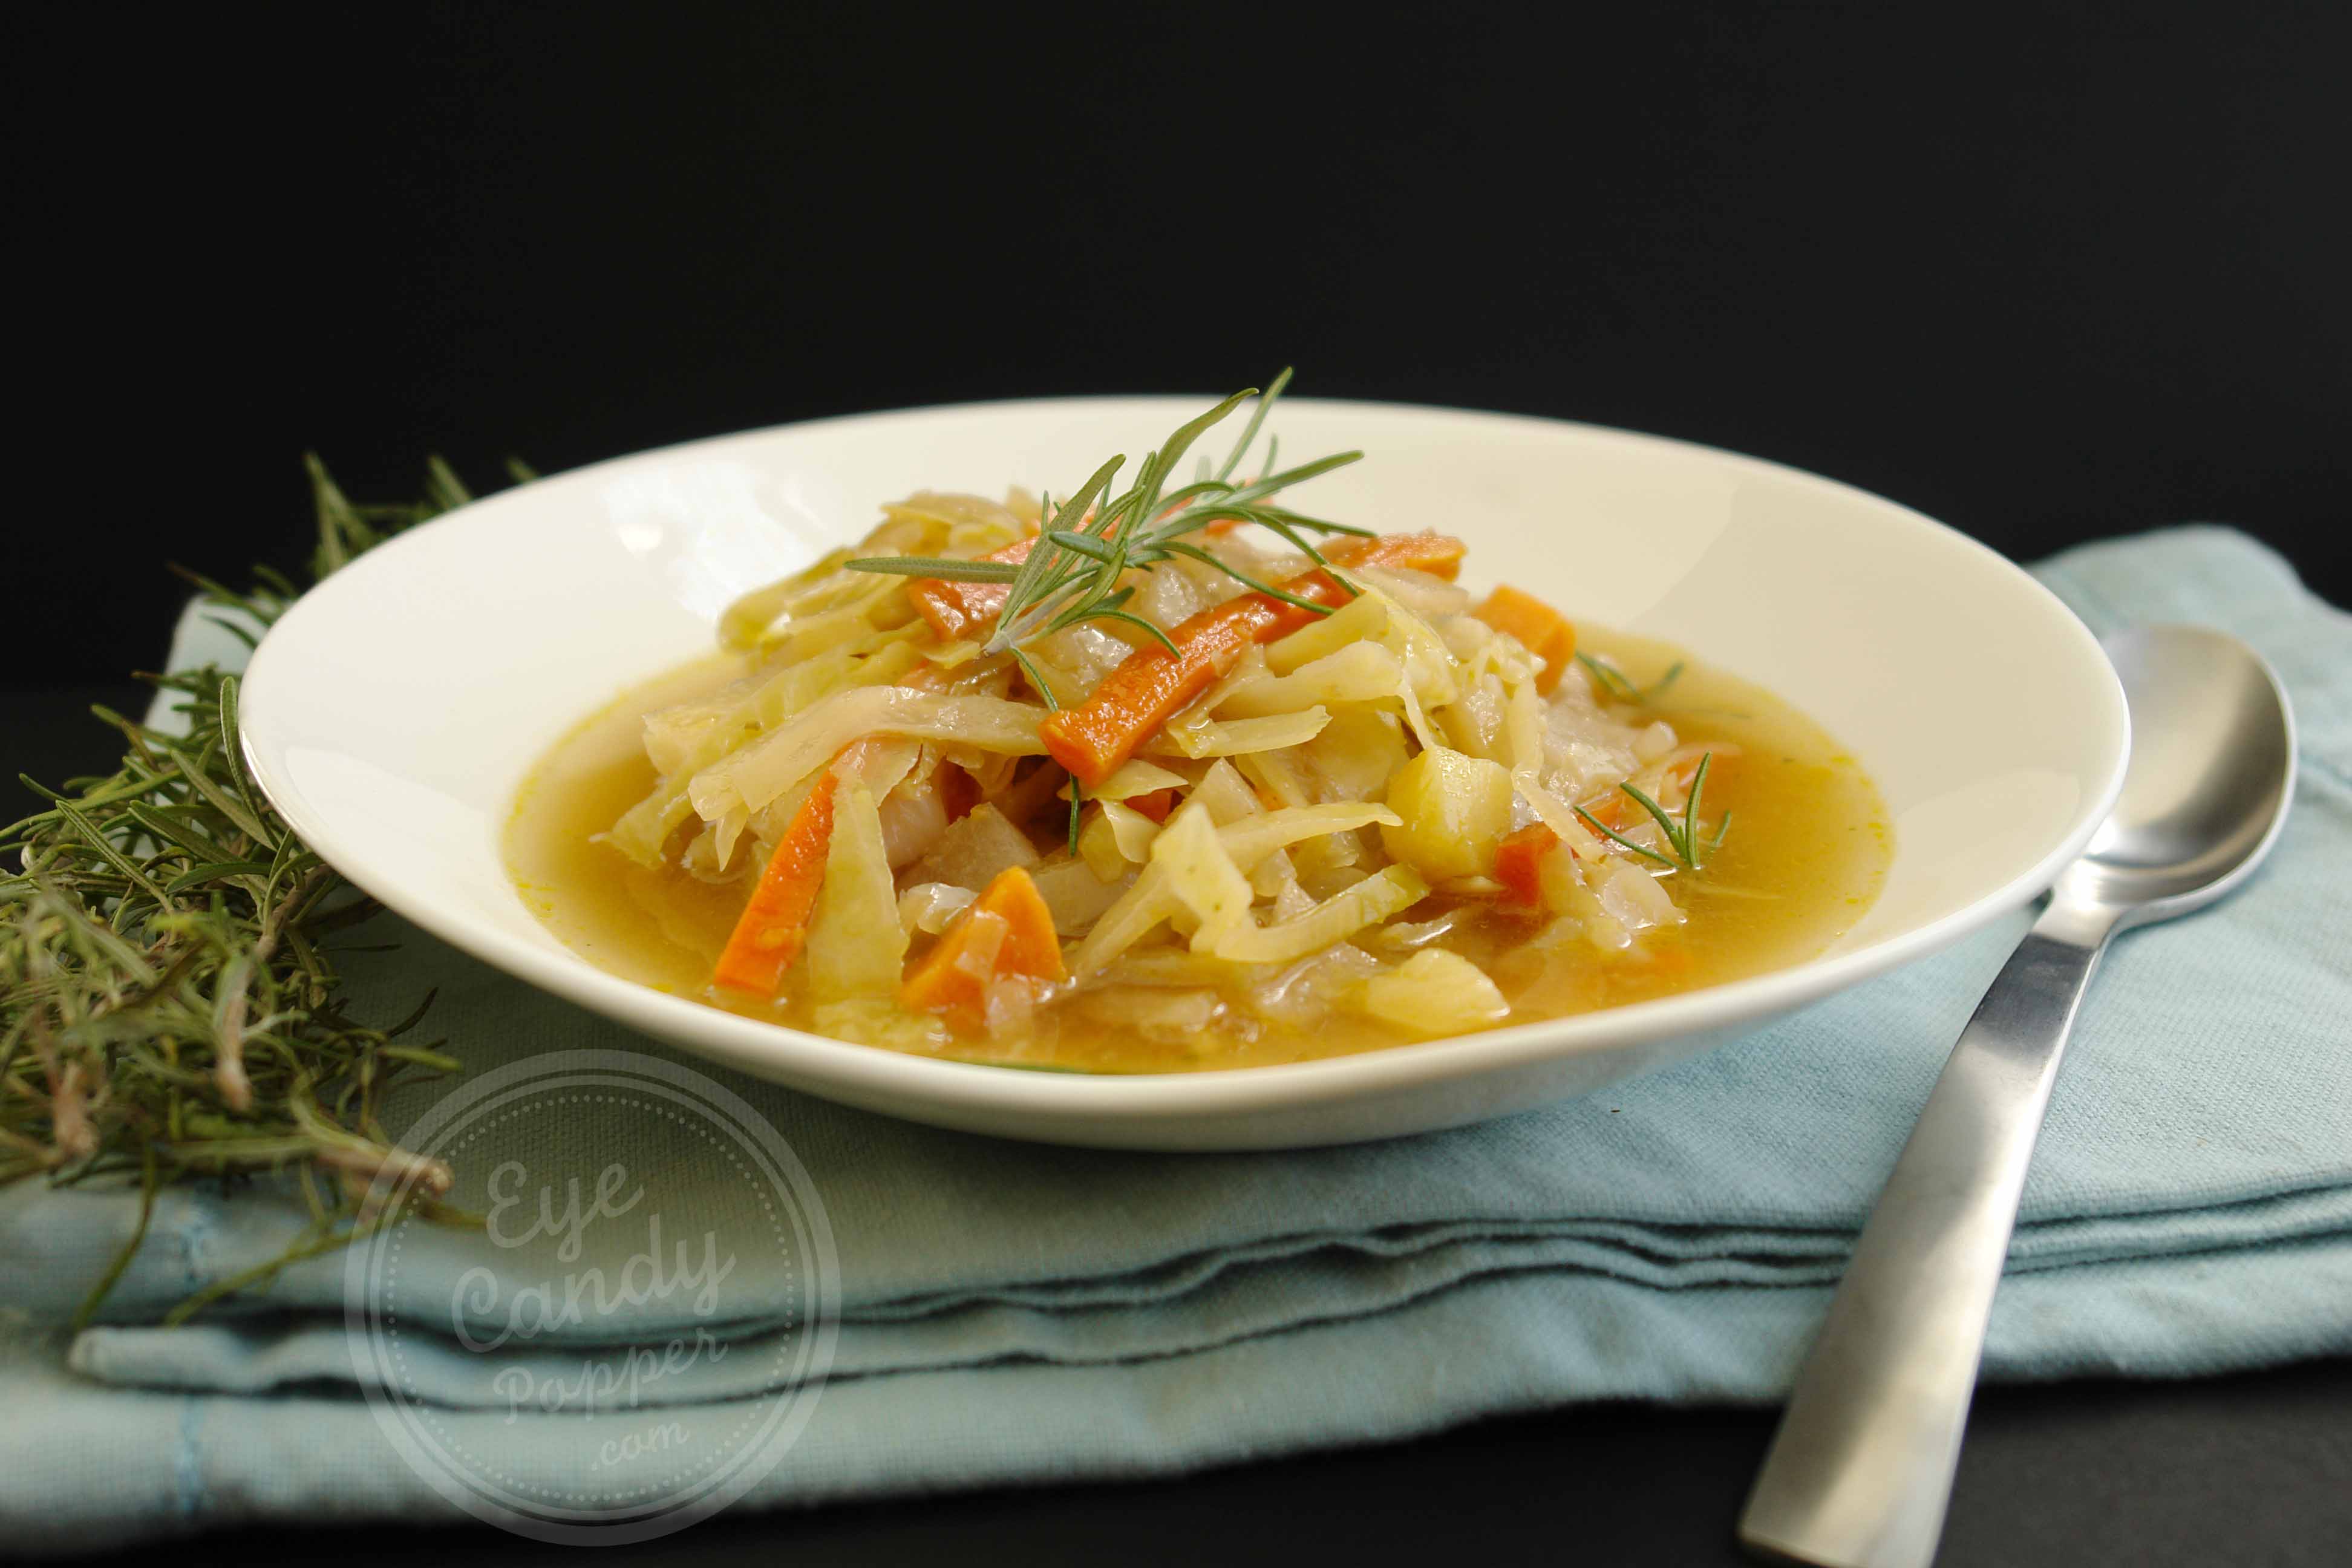 Country braised cabbage soup (vegan option, gluten-free)